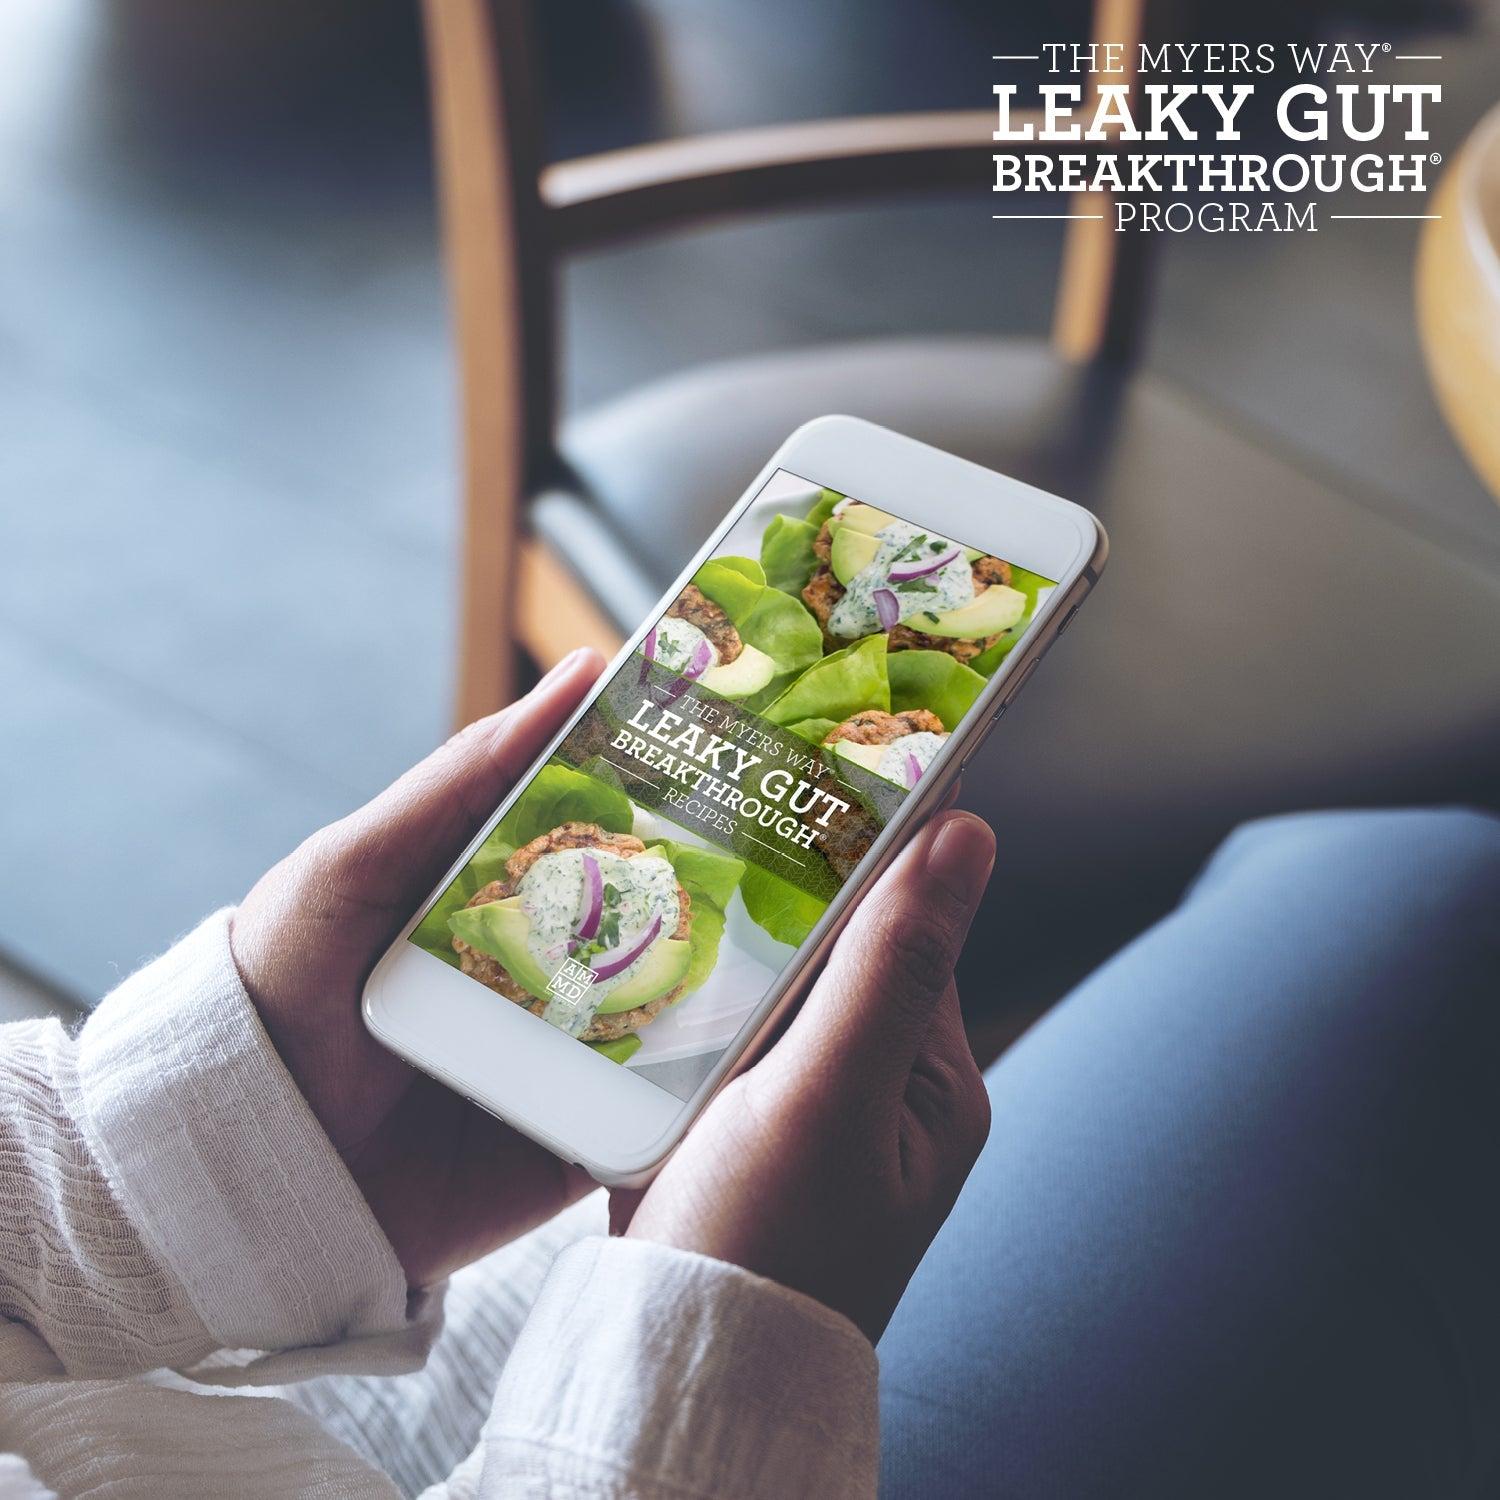 A Woman views The Leaky Gut Breakthrough Program Recipes on a smart phone - Amy Myers MD®